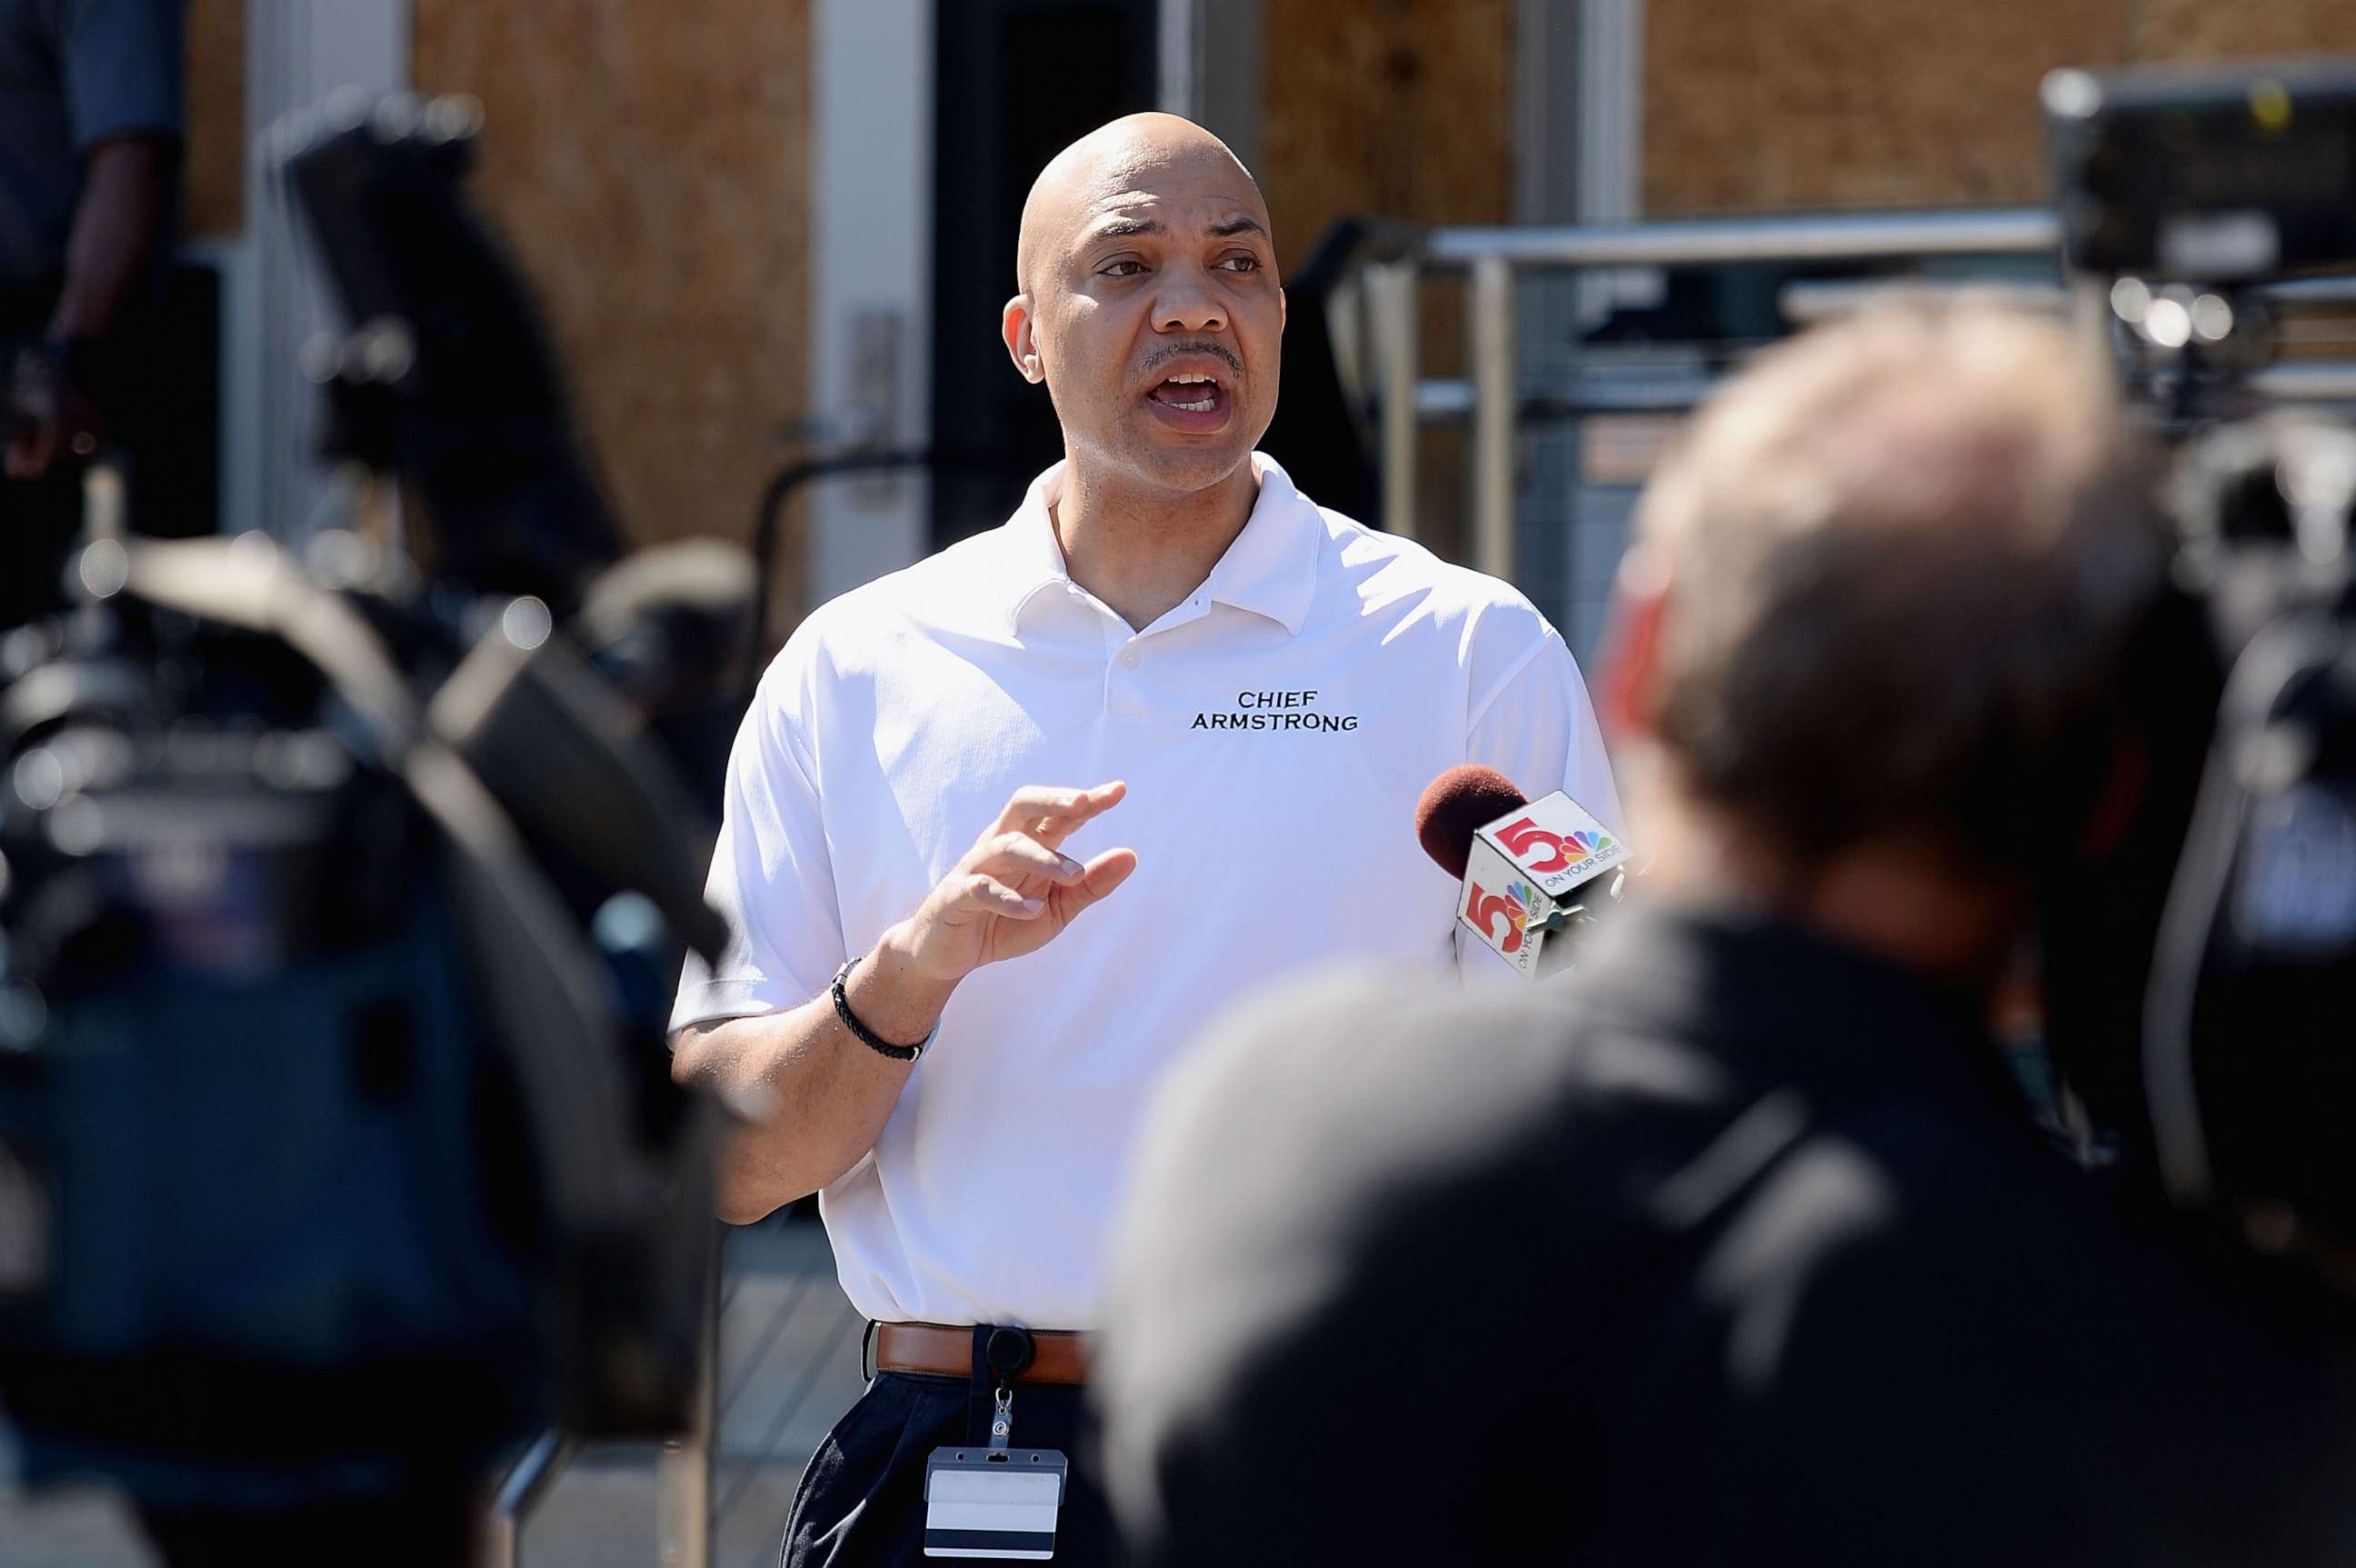 PHOTO: Ferguson Police Chief, Jason Armstrong speaks to media as volunteers help cleanup from an overnight clash between protesters and law enforcement at the Ferguson Police Department on May 31, 2020 in Ferguson, Missouri.